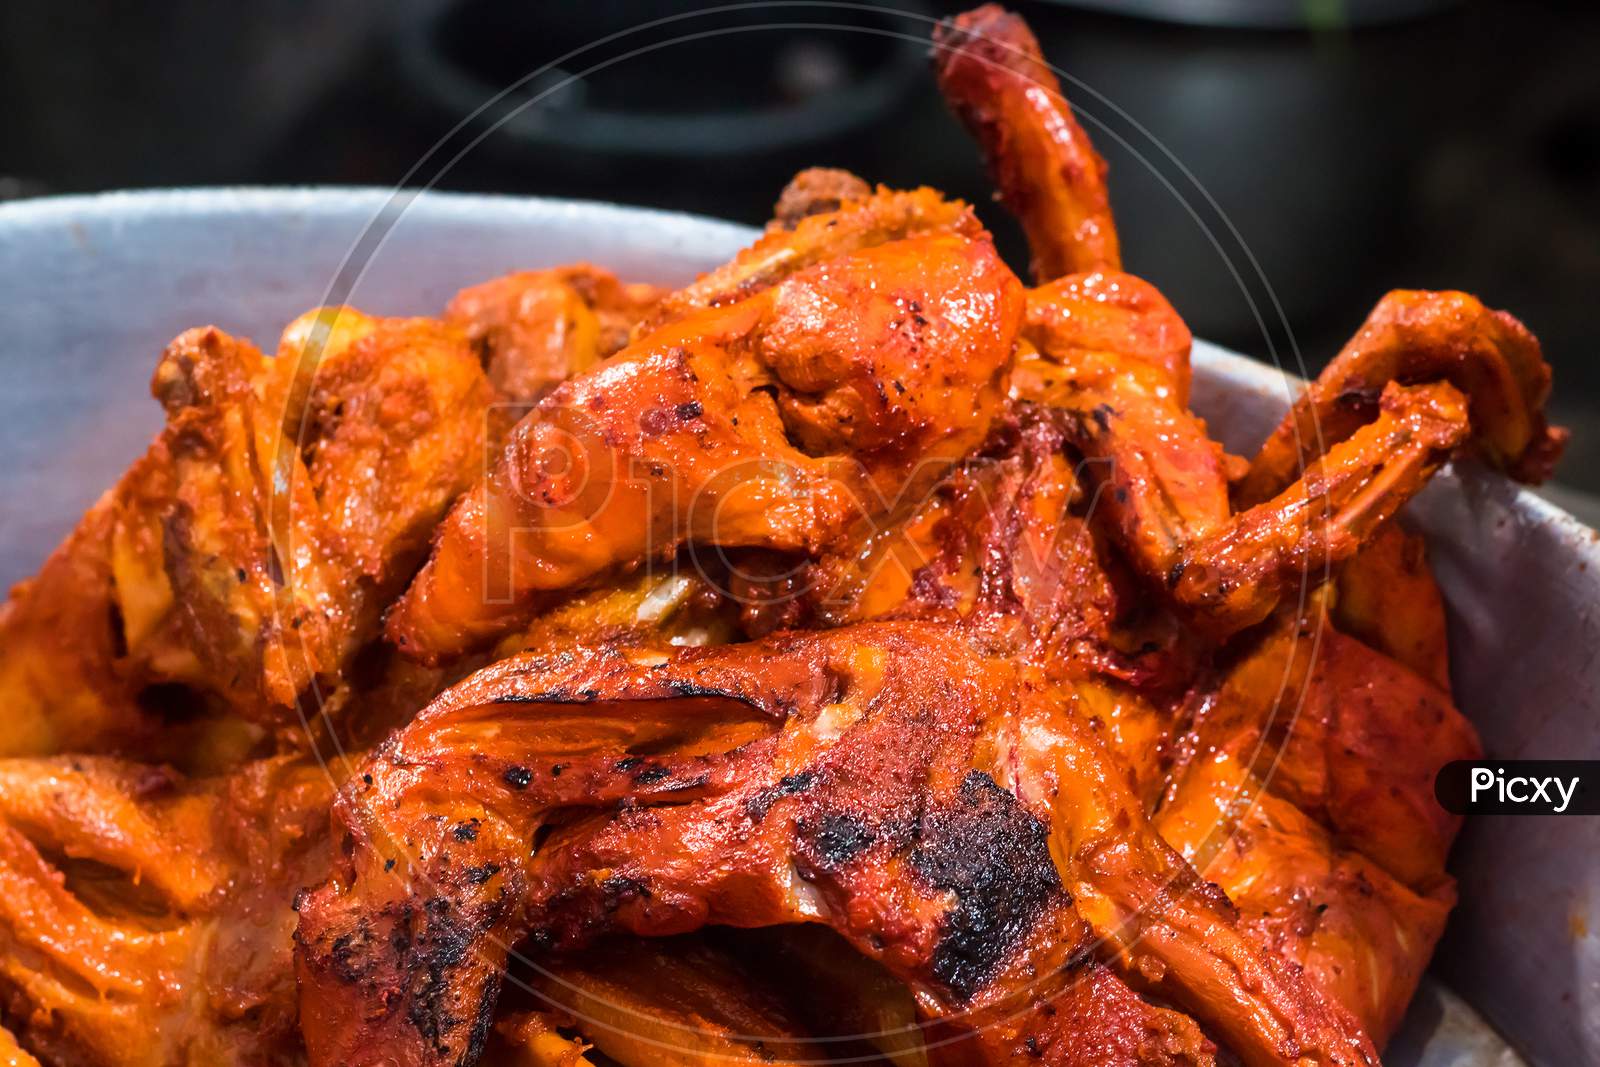 Indian Style Roasted Chicken Or Tandoori Chicken . Indian Non Vegetarian Food. - Image